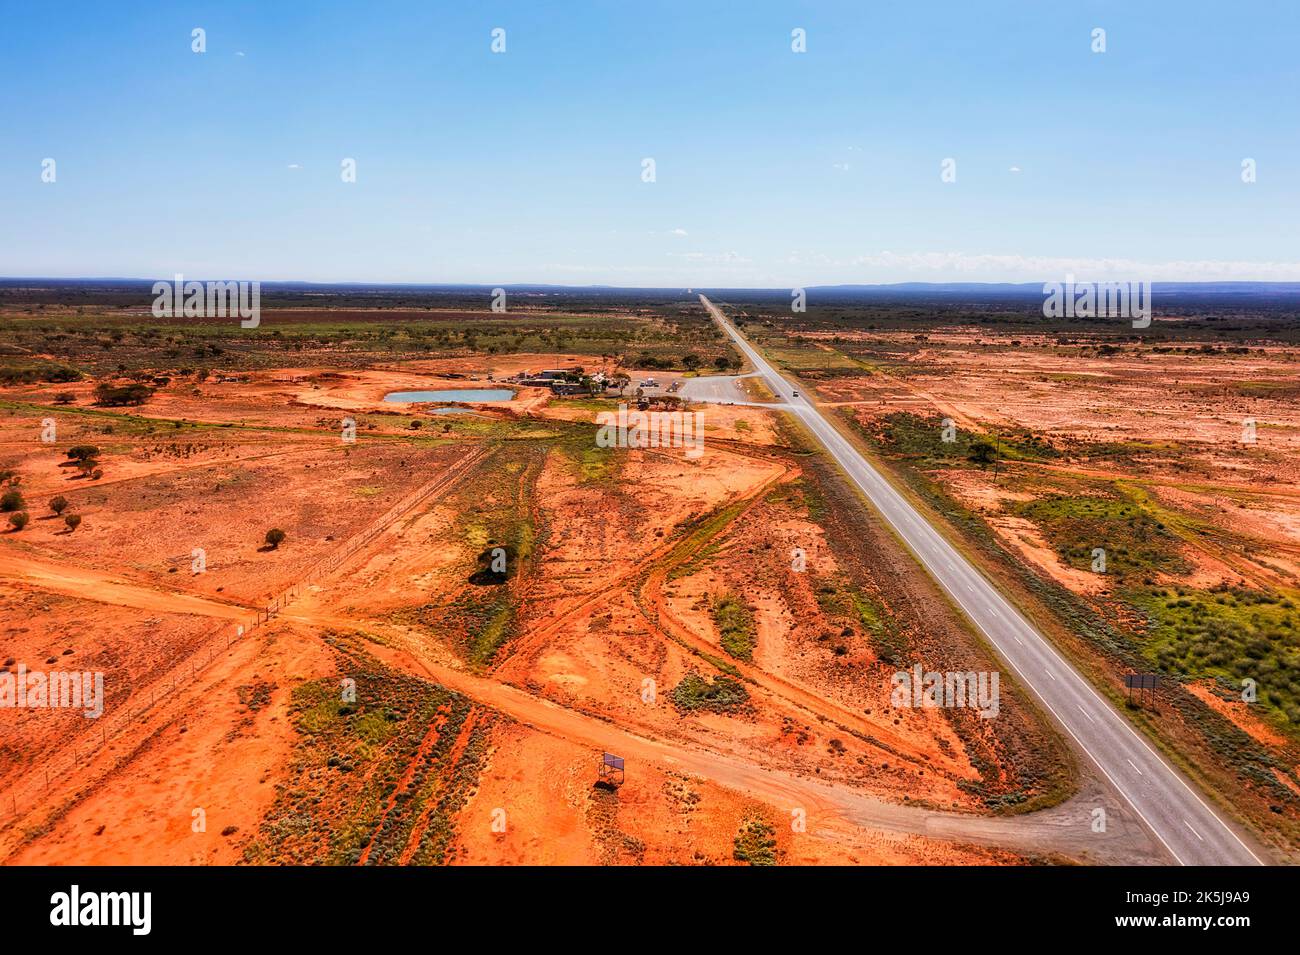 Roadhouse at Little Topar on A32 Barrier highway near Broken Hill silver mining city of Australian outback - aerial landscape. Stock Photo